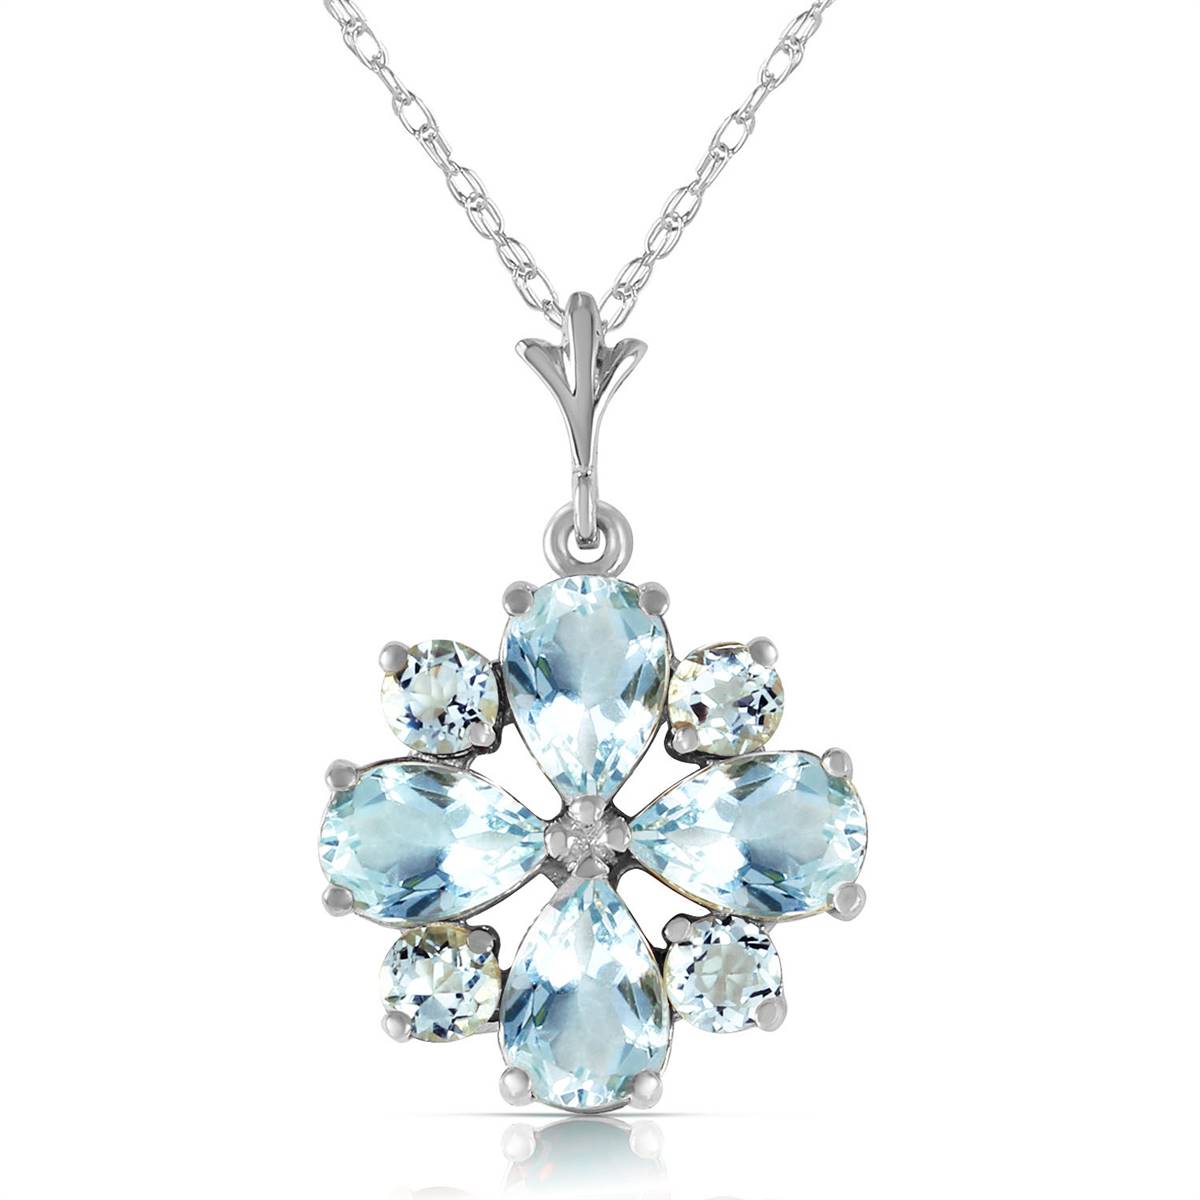 2.43 Carat 14K Solid White Gold Form Of Flattery Aquamarine Necklace